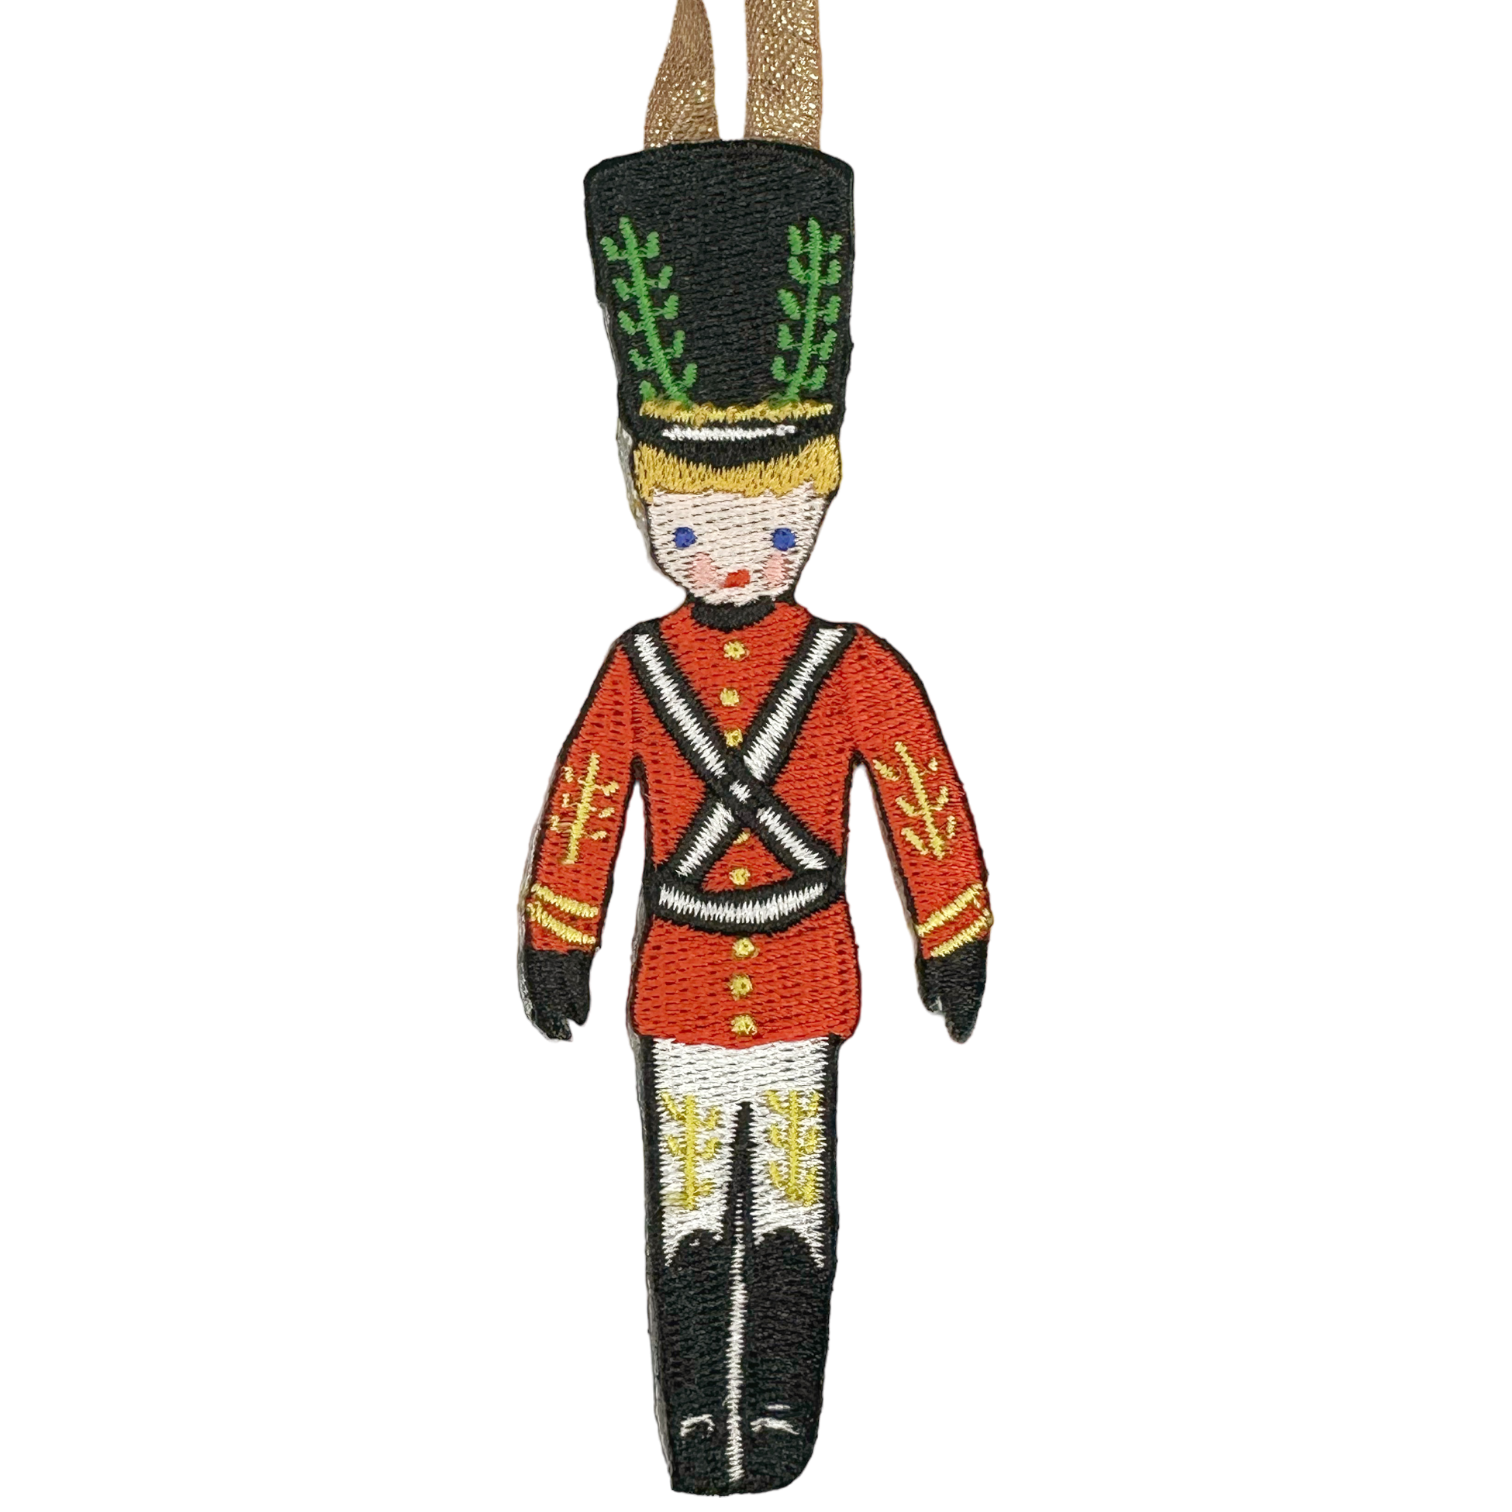 Nutcracker Embroidered Ornament - Drosselmeyer - Premium  from Tricia Lowenfield Design 